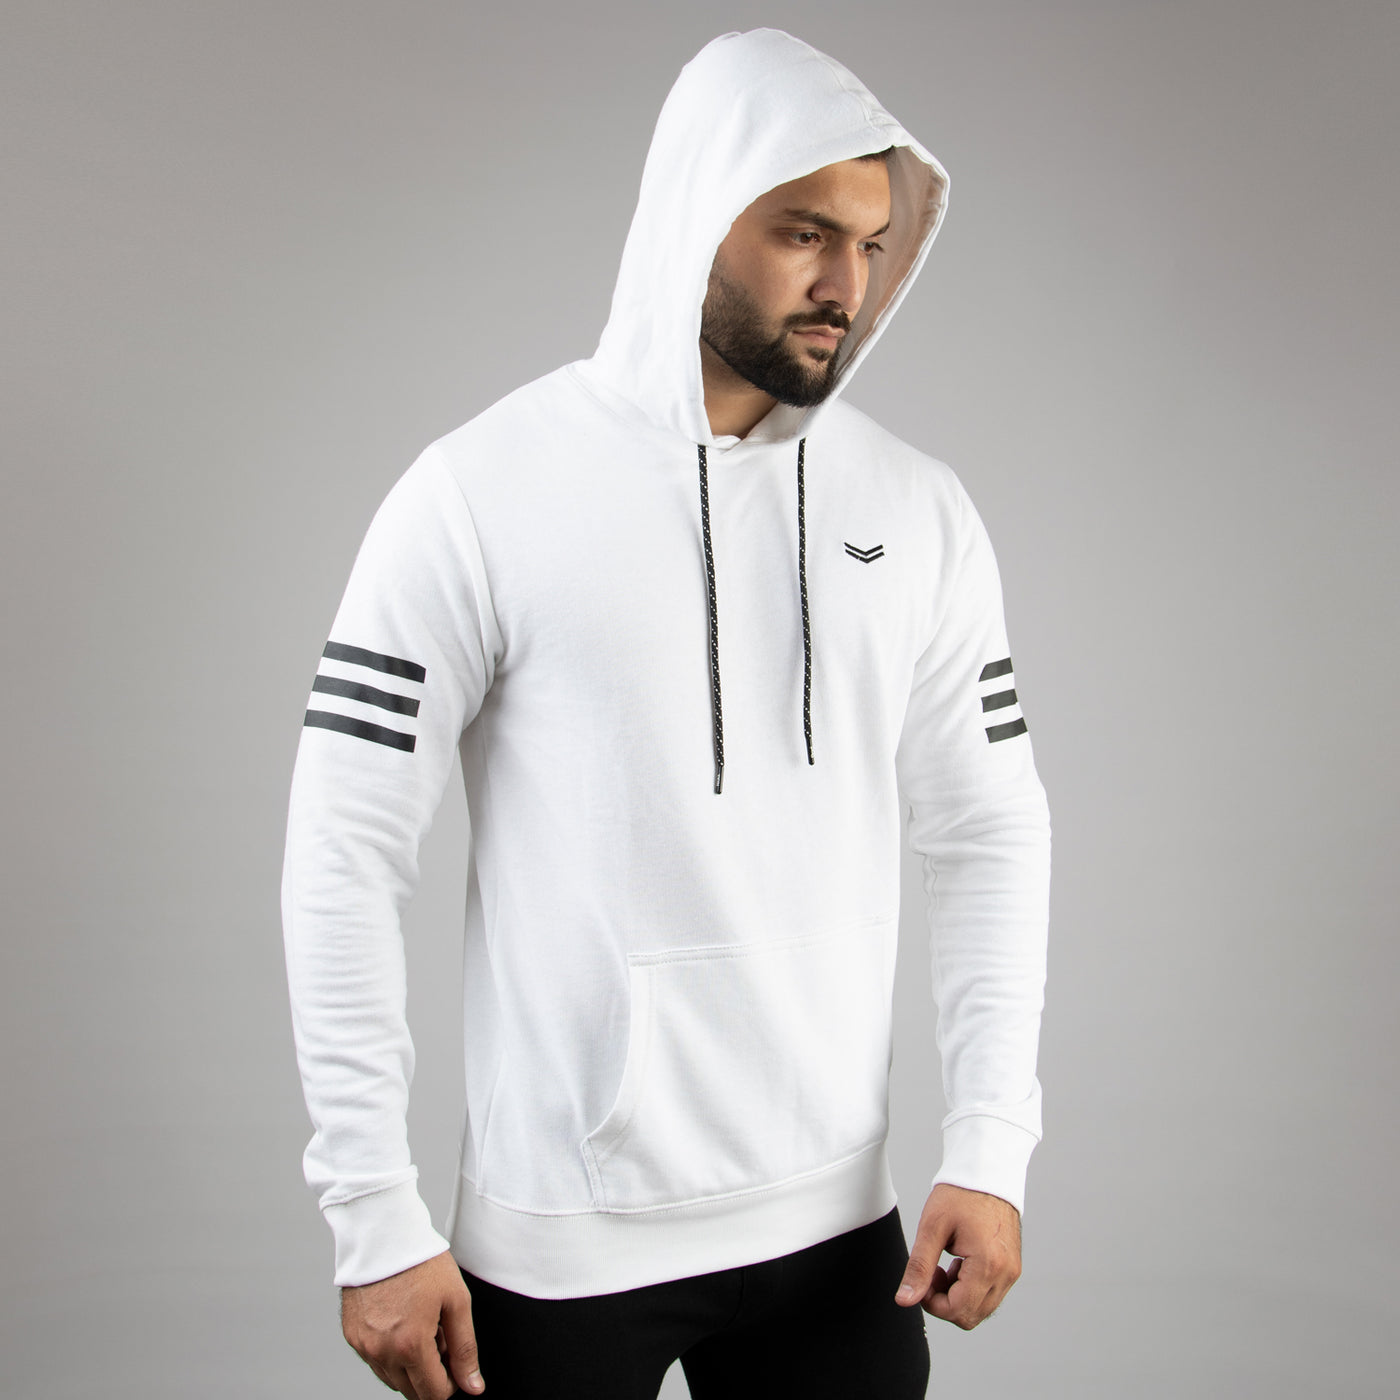 White Hoodie with Black Side Stripes